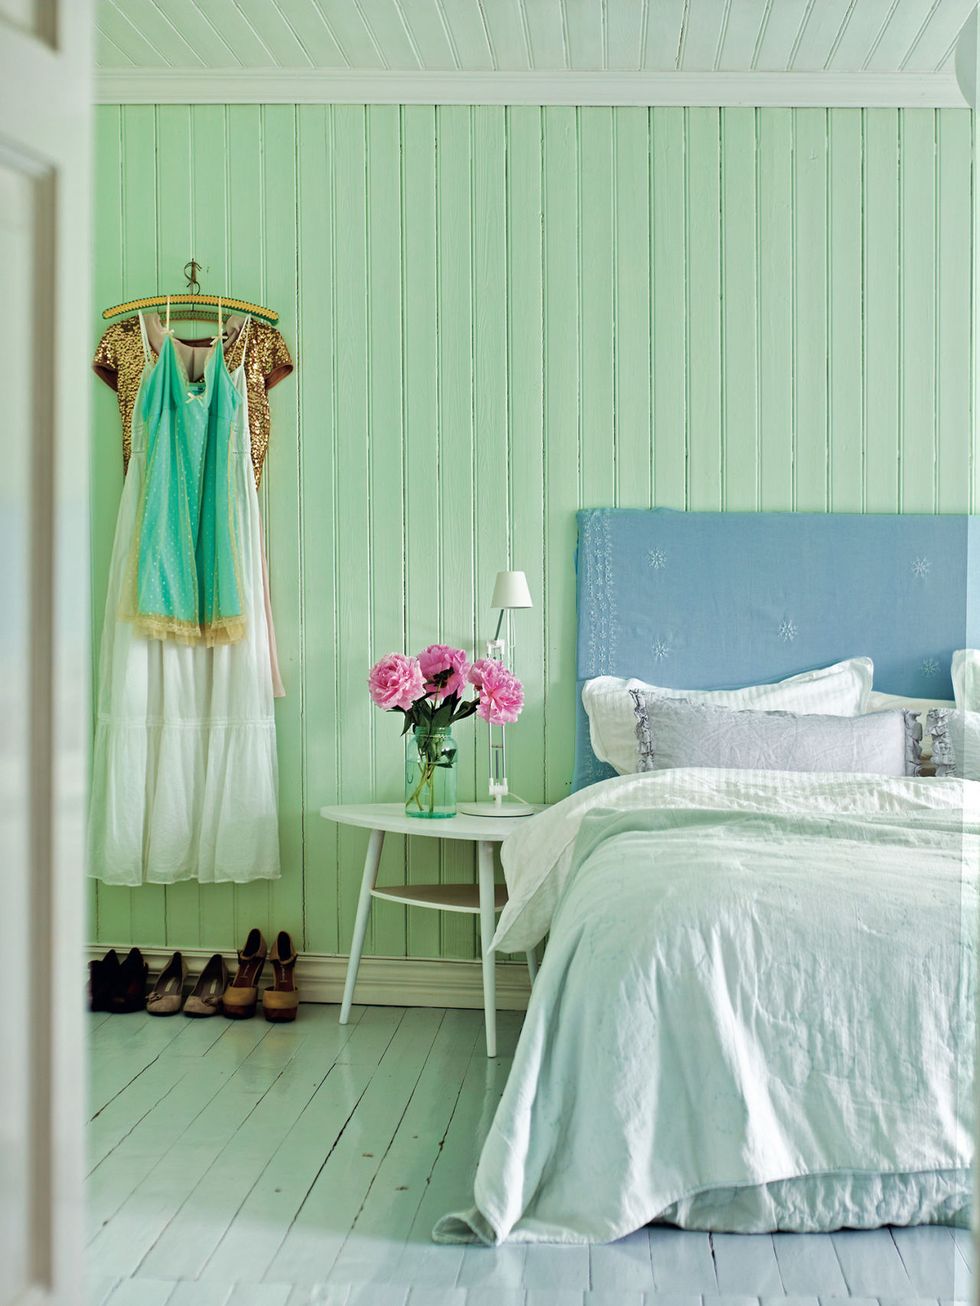 make your home feel brighter with pastel tones